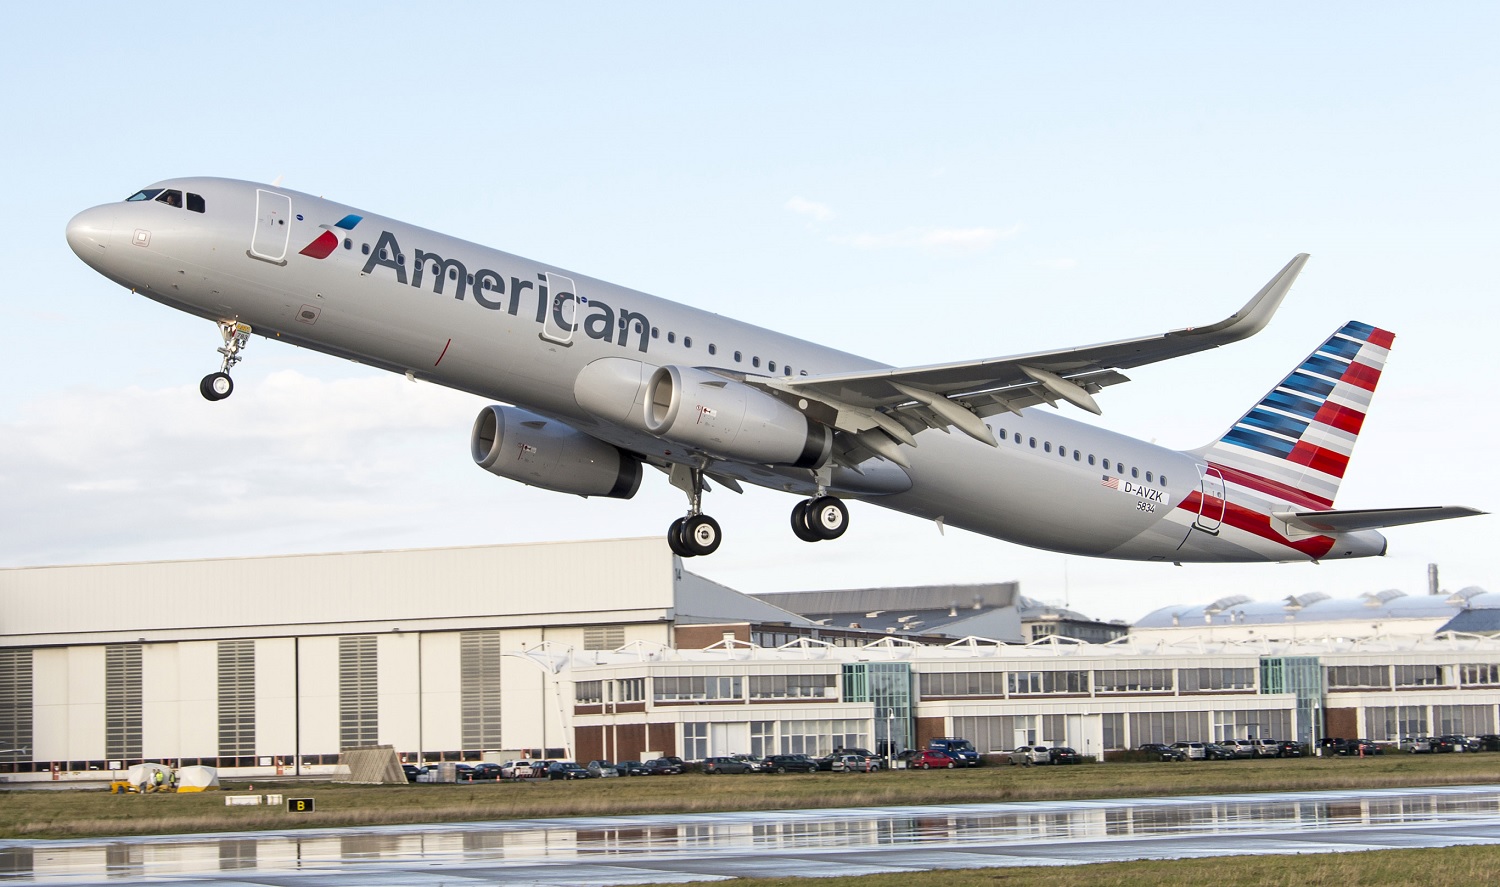 American Airlines, A321, Airbus, Transcontinental